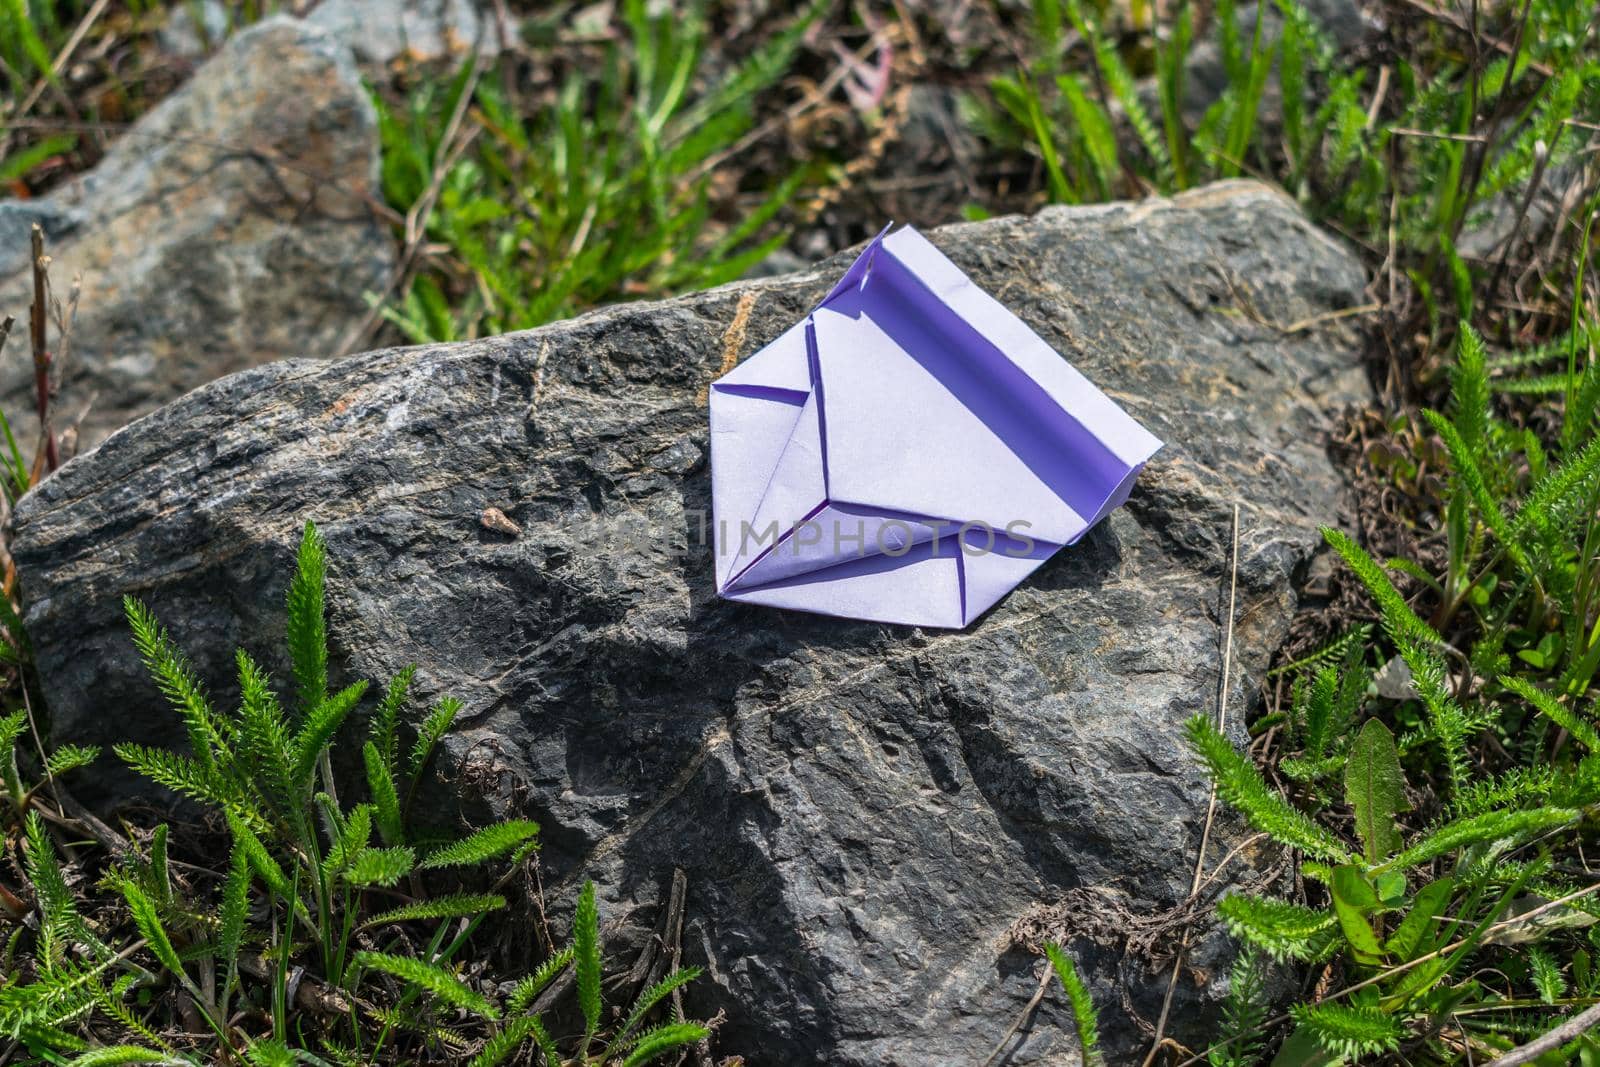 A hobby to do origami folding a car out of paper and put it on a stone in the grass in the summer in the bright sun